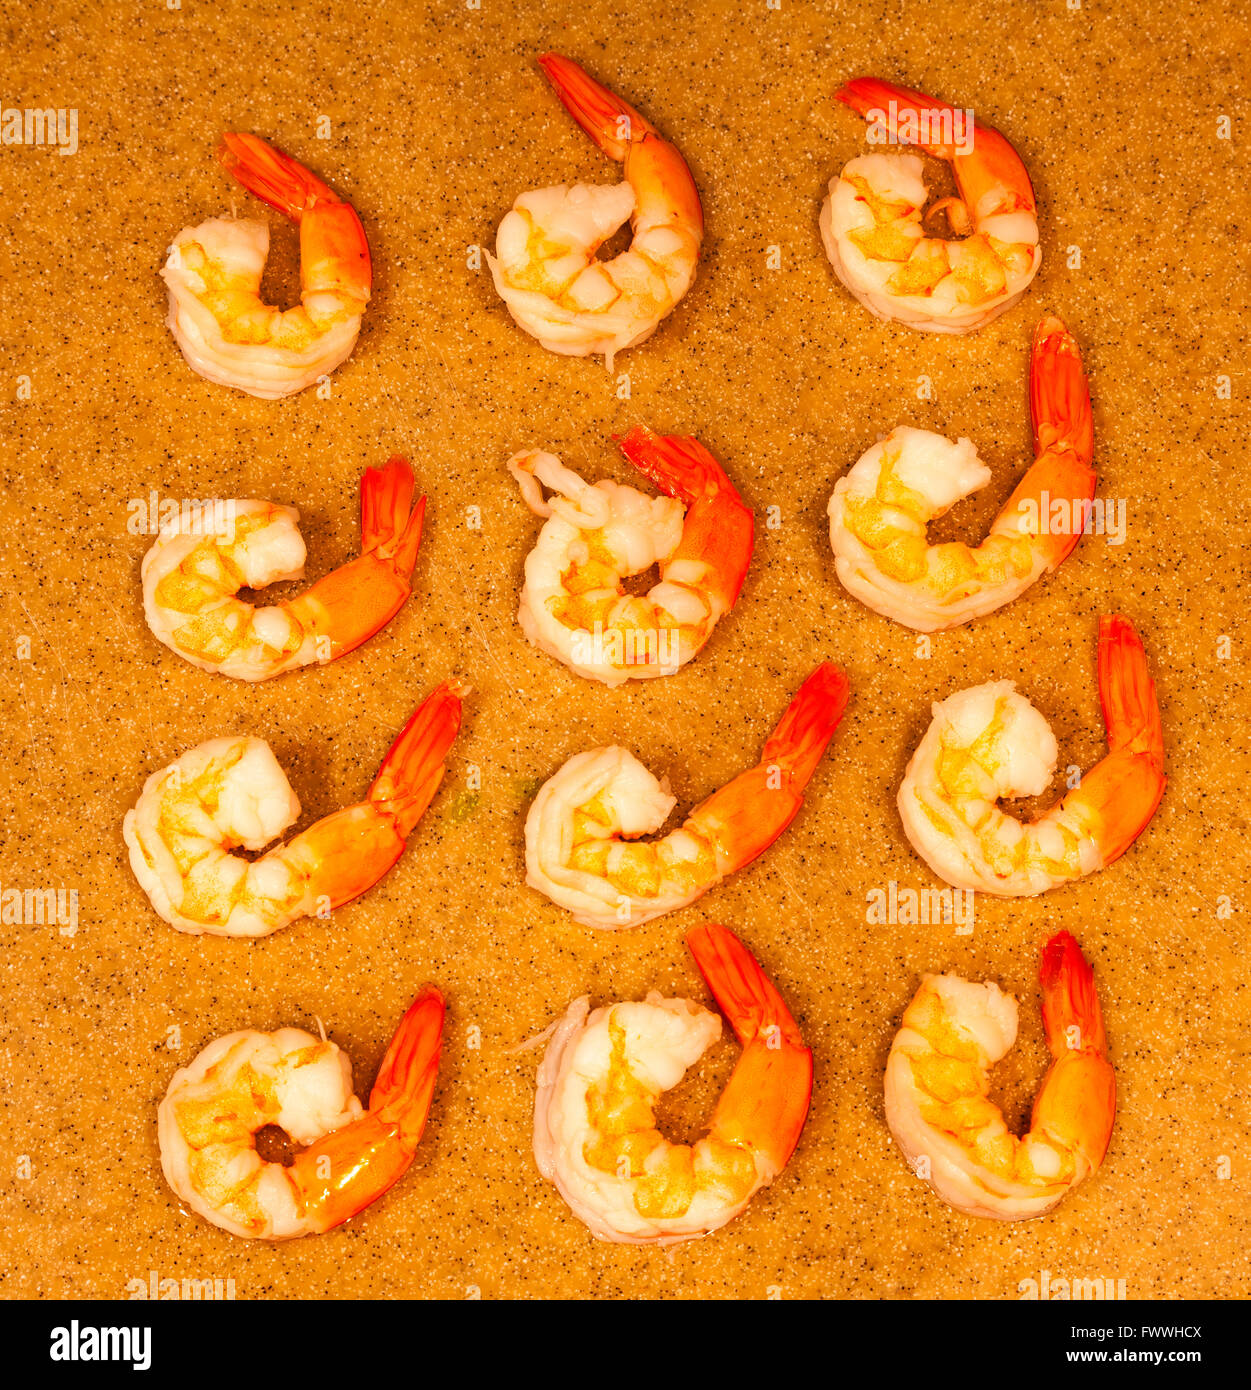 Arrangement Of Twelve Cooked Shrimp With Tails On Stock Photo